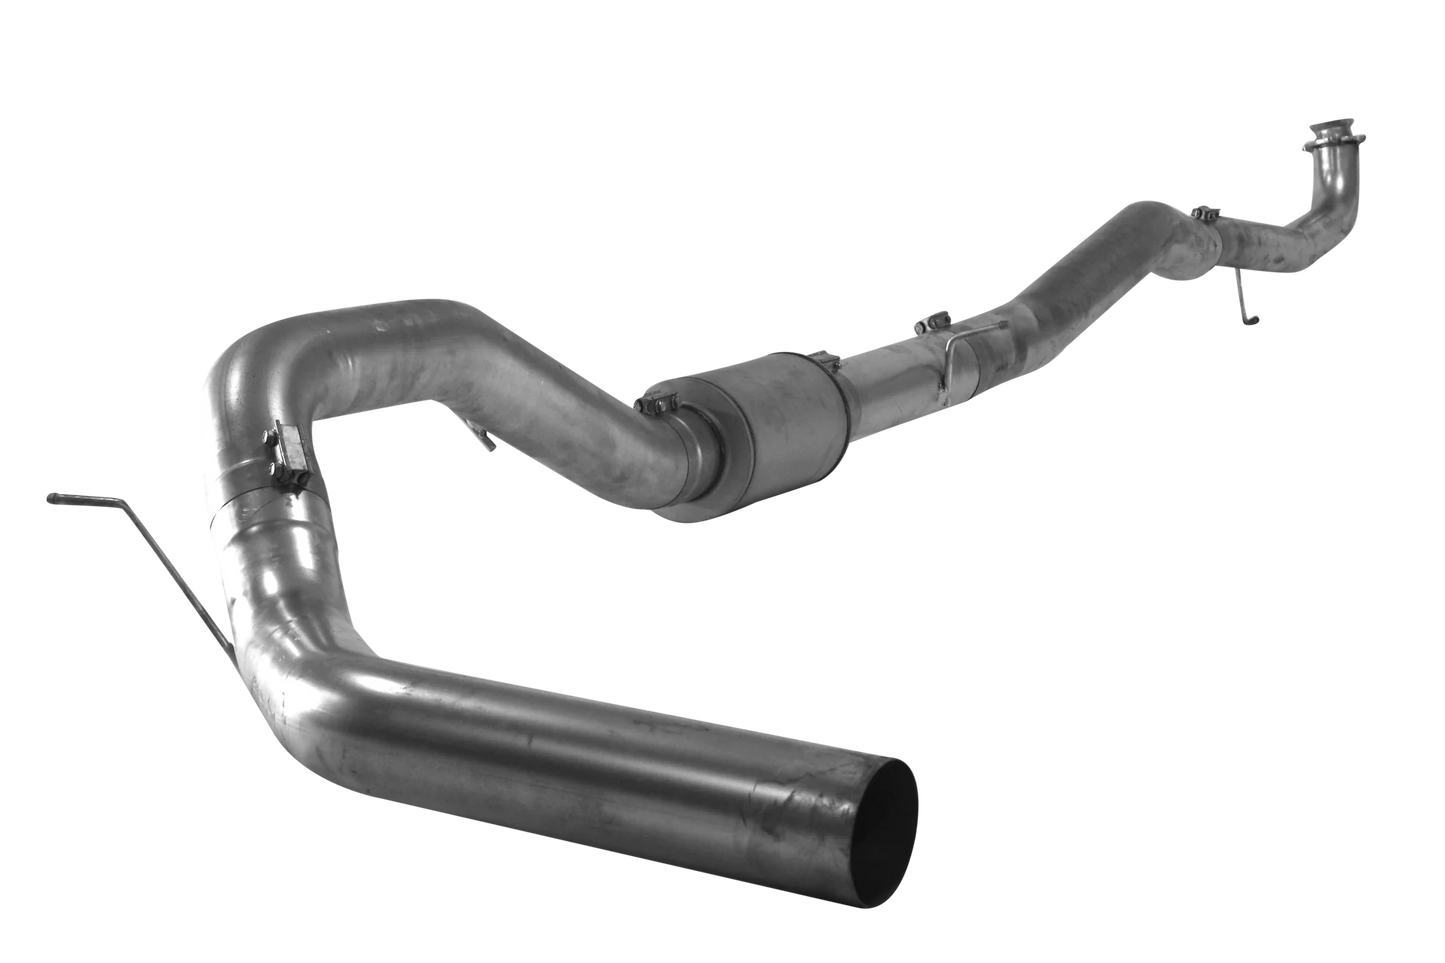 531016 531017 532016 532017 Mel's Manufacturing 5" Downpipe Back Single | 2020-2023 GM 2500/3500 6.6L DURAMAX L5P  Mels Mfg FloPro Flo-Pro Flo Pro Hell On Wheels Performance Ltd Limited Canadian Owned and Operated Online Diesel Parts Distribution & Wholesale Supply Center in Alberta Canada Shipping Supplying to Alberta British Columbia Sask Saskatchewan Manitoba Ontario Quebec Newfoundland Labrador New Brunswick Nova Scotia Prince Edward Island AB BC SK MB ON QC PQ NS NB NFLD N.L. PEI